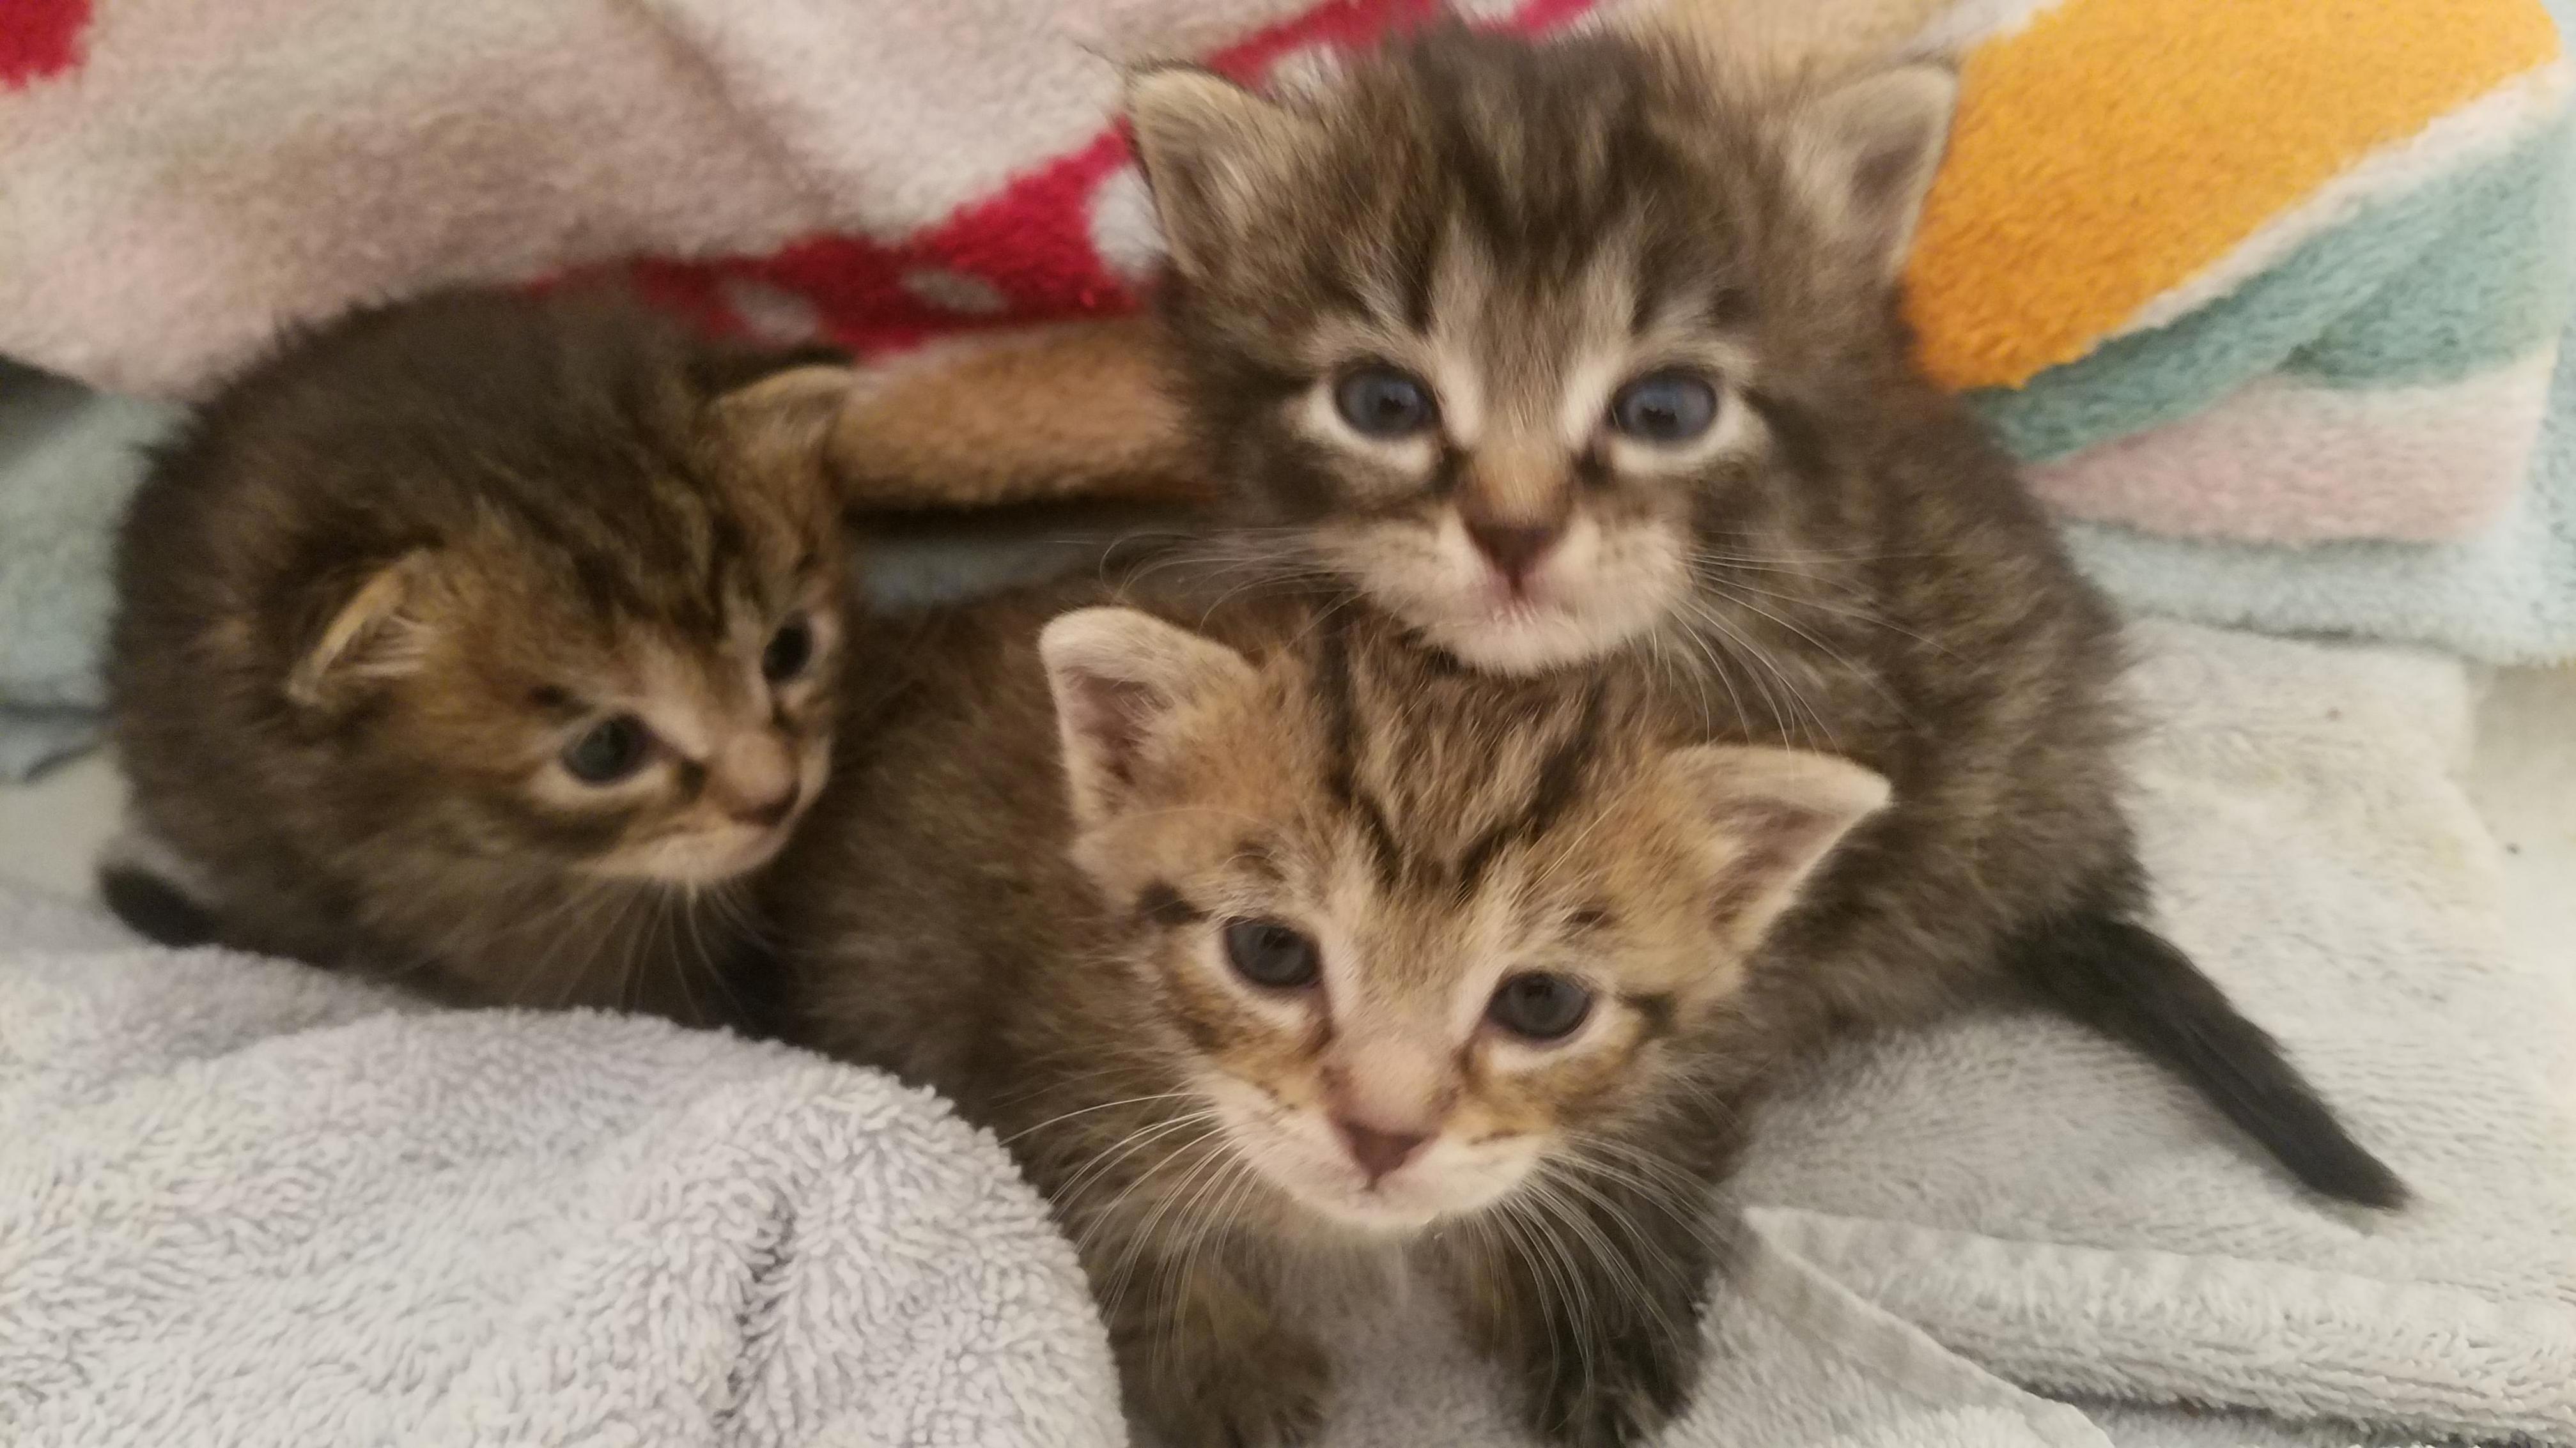 Adorable foster babies, about 4 weeks old